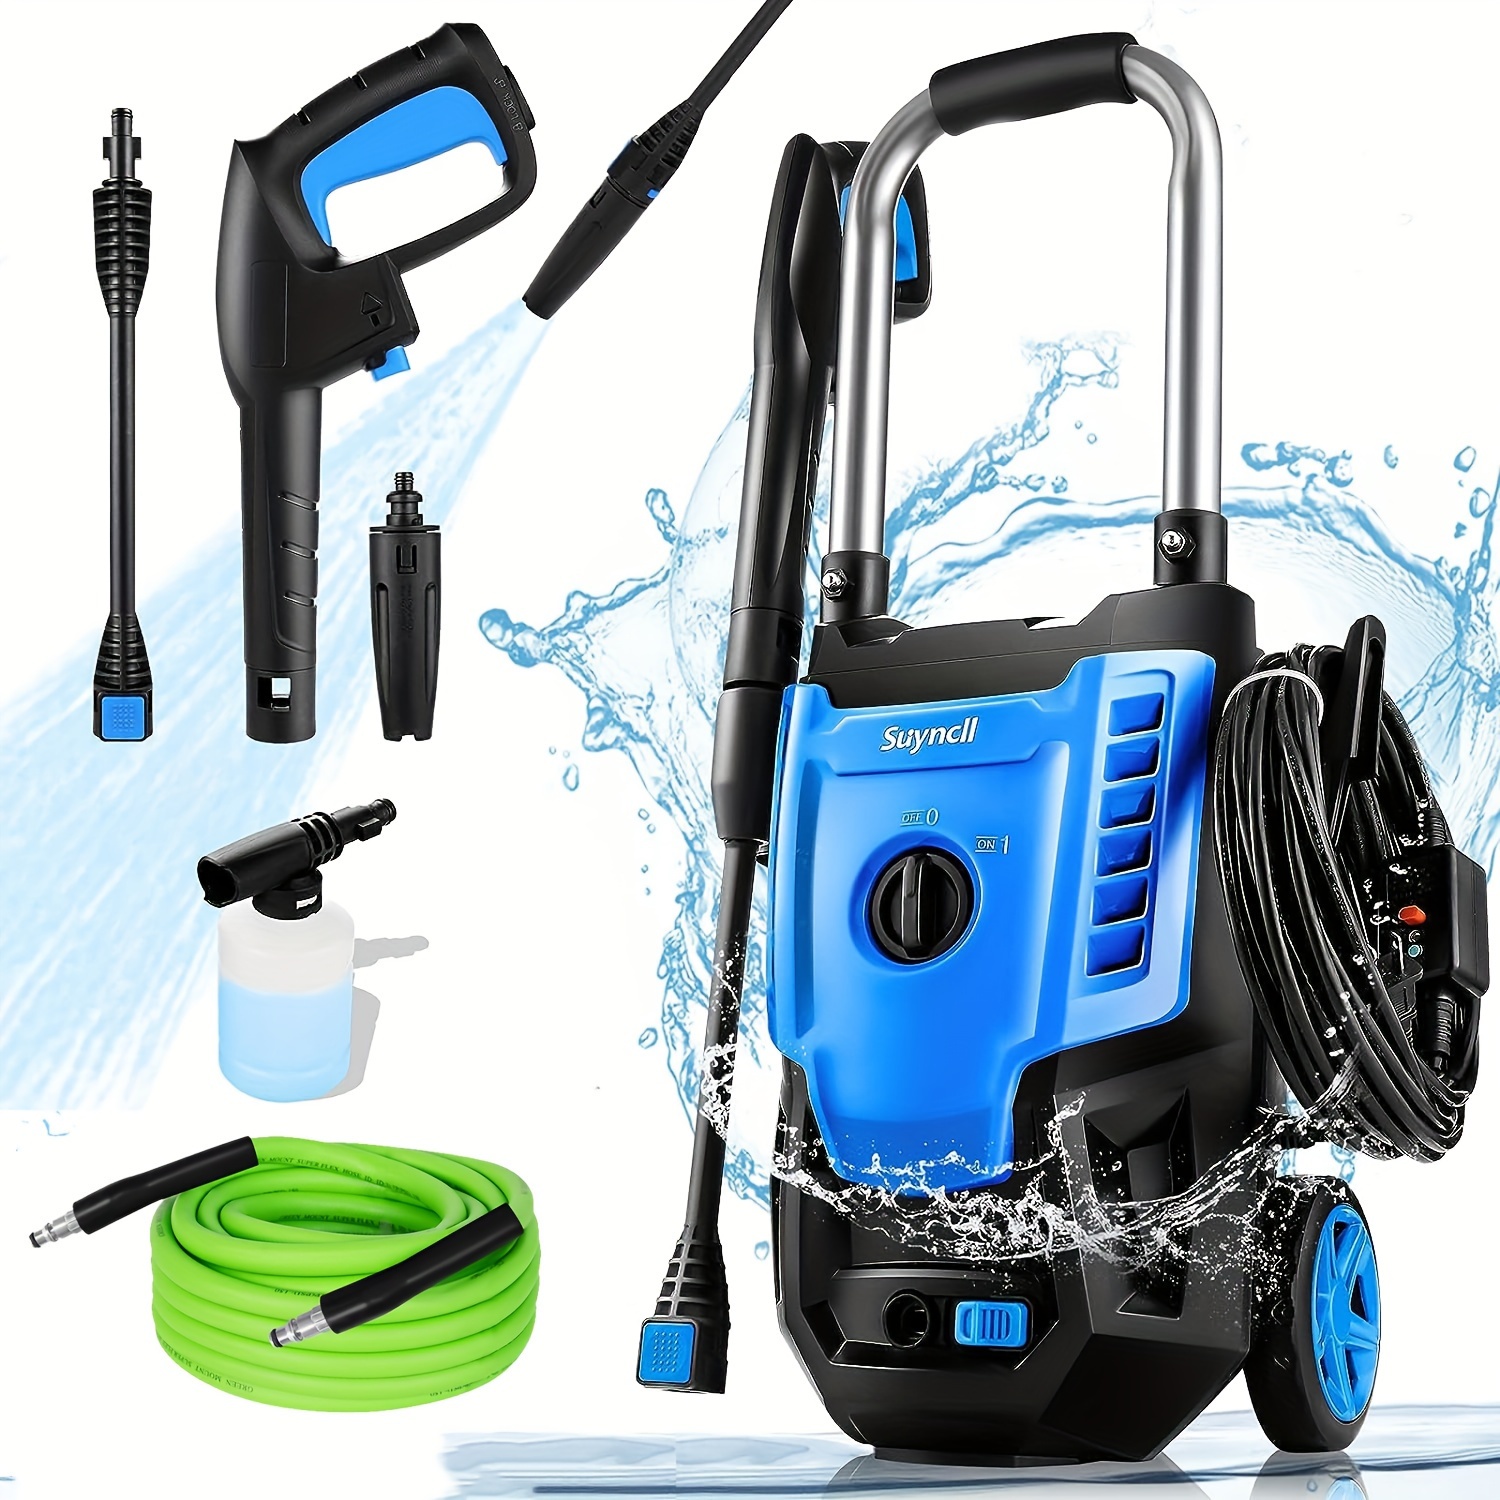 

Homdox, 1800w Electric Pressure Washer, Maximum 2.5 Gpm High Power Cleaner, With Multi-functional Nozzle And Foam Cannon, Suitable For Cleaning Cars, Patios, And Floors.